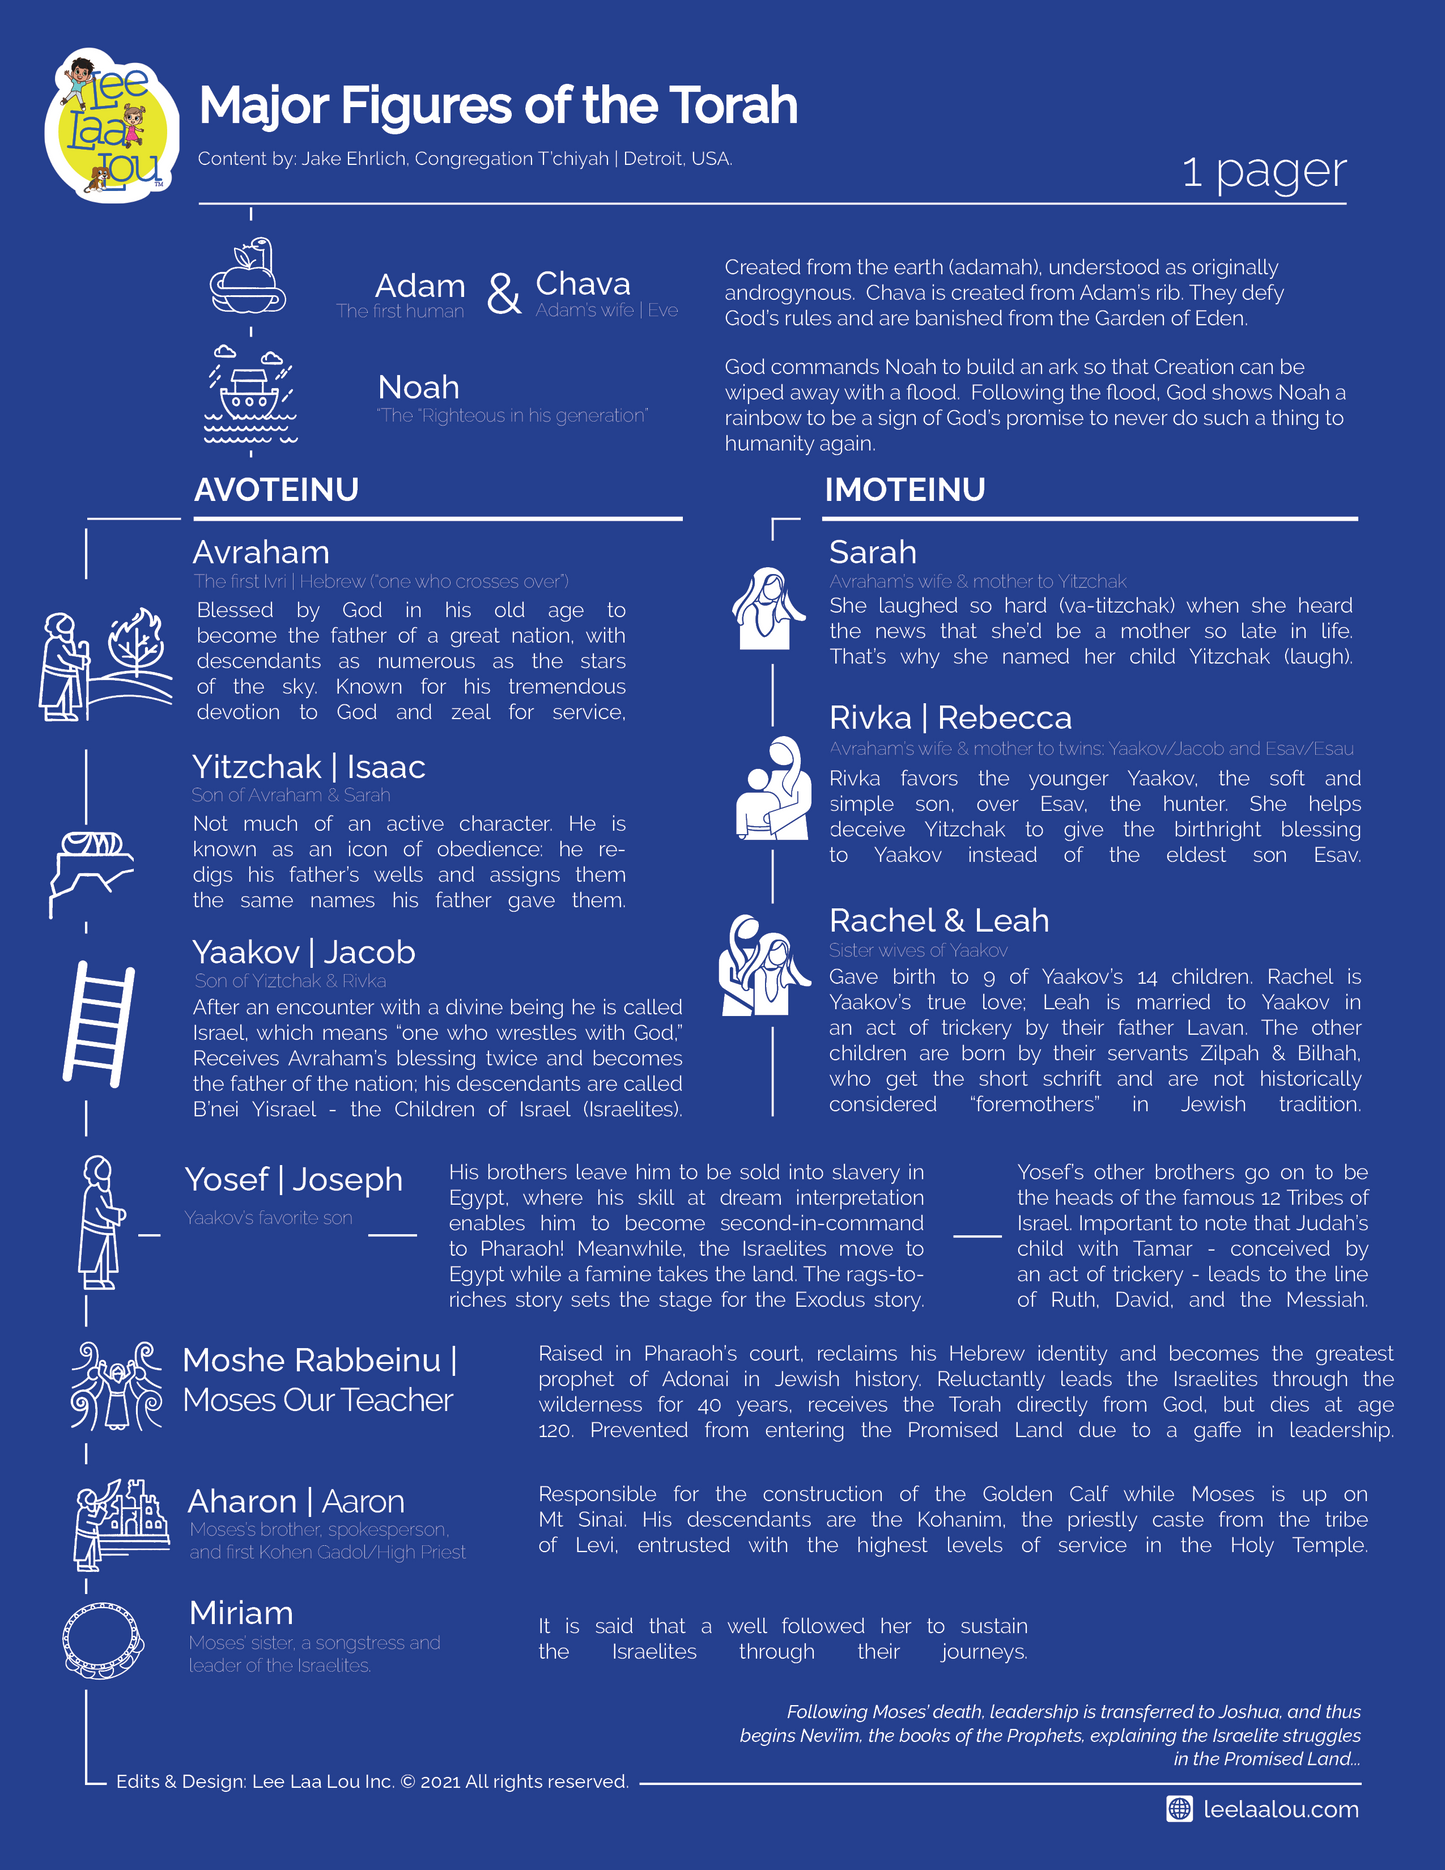 One Pager - Major Figures of the Torah (The Bible)